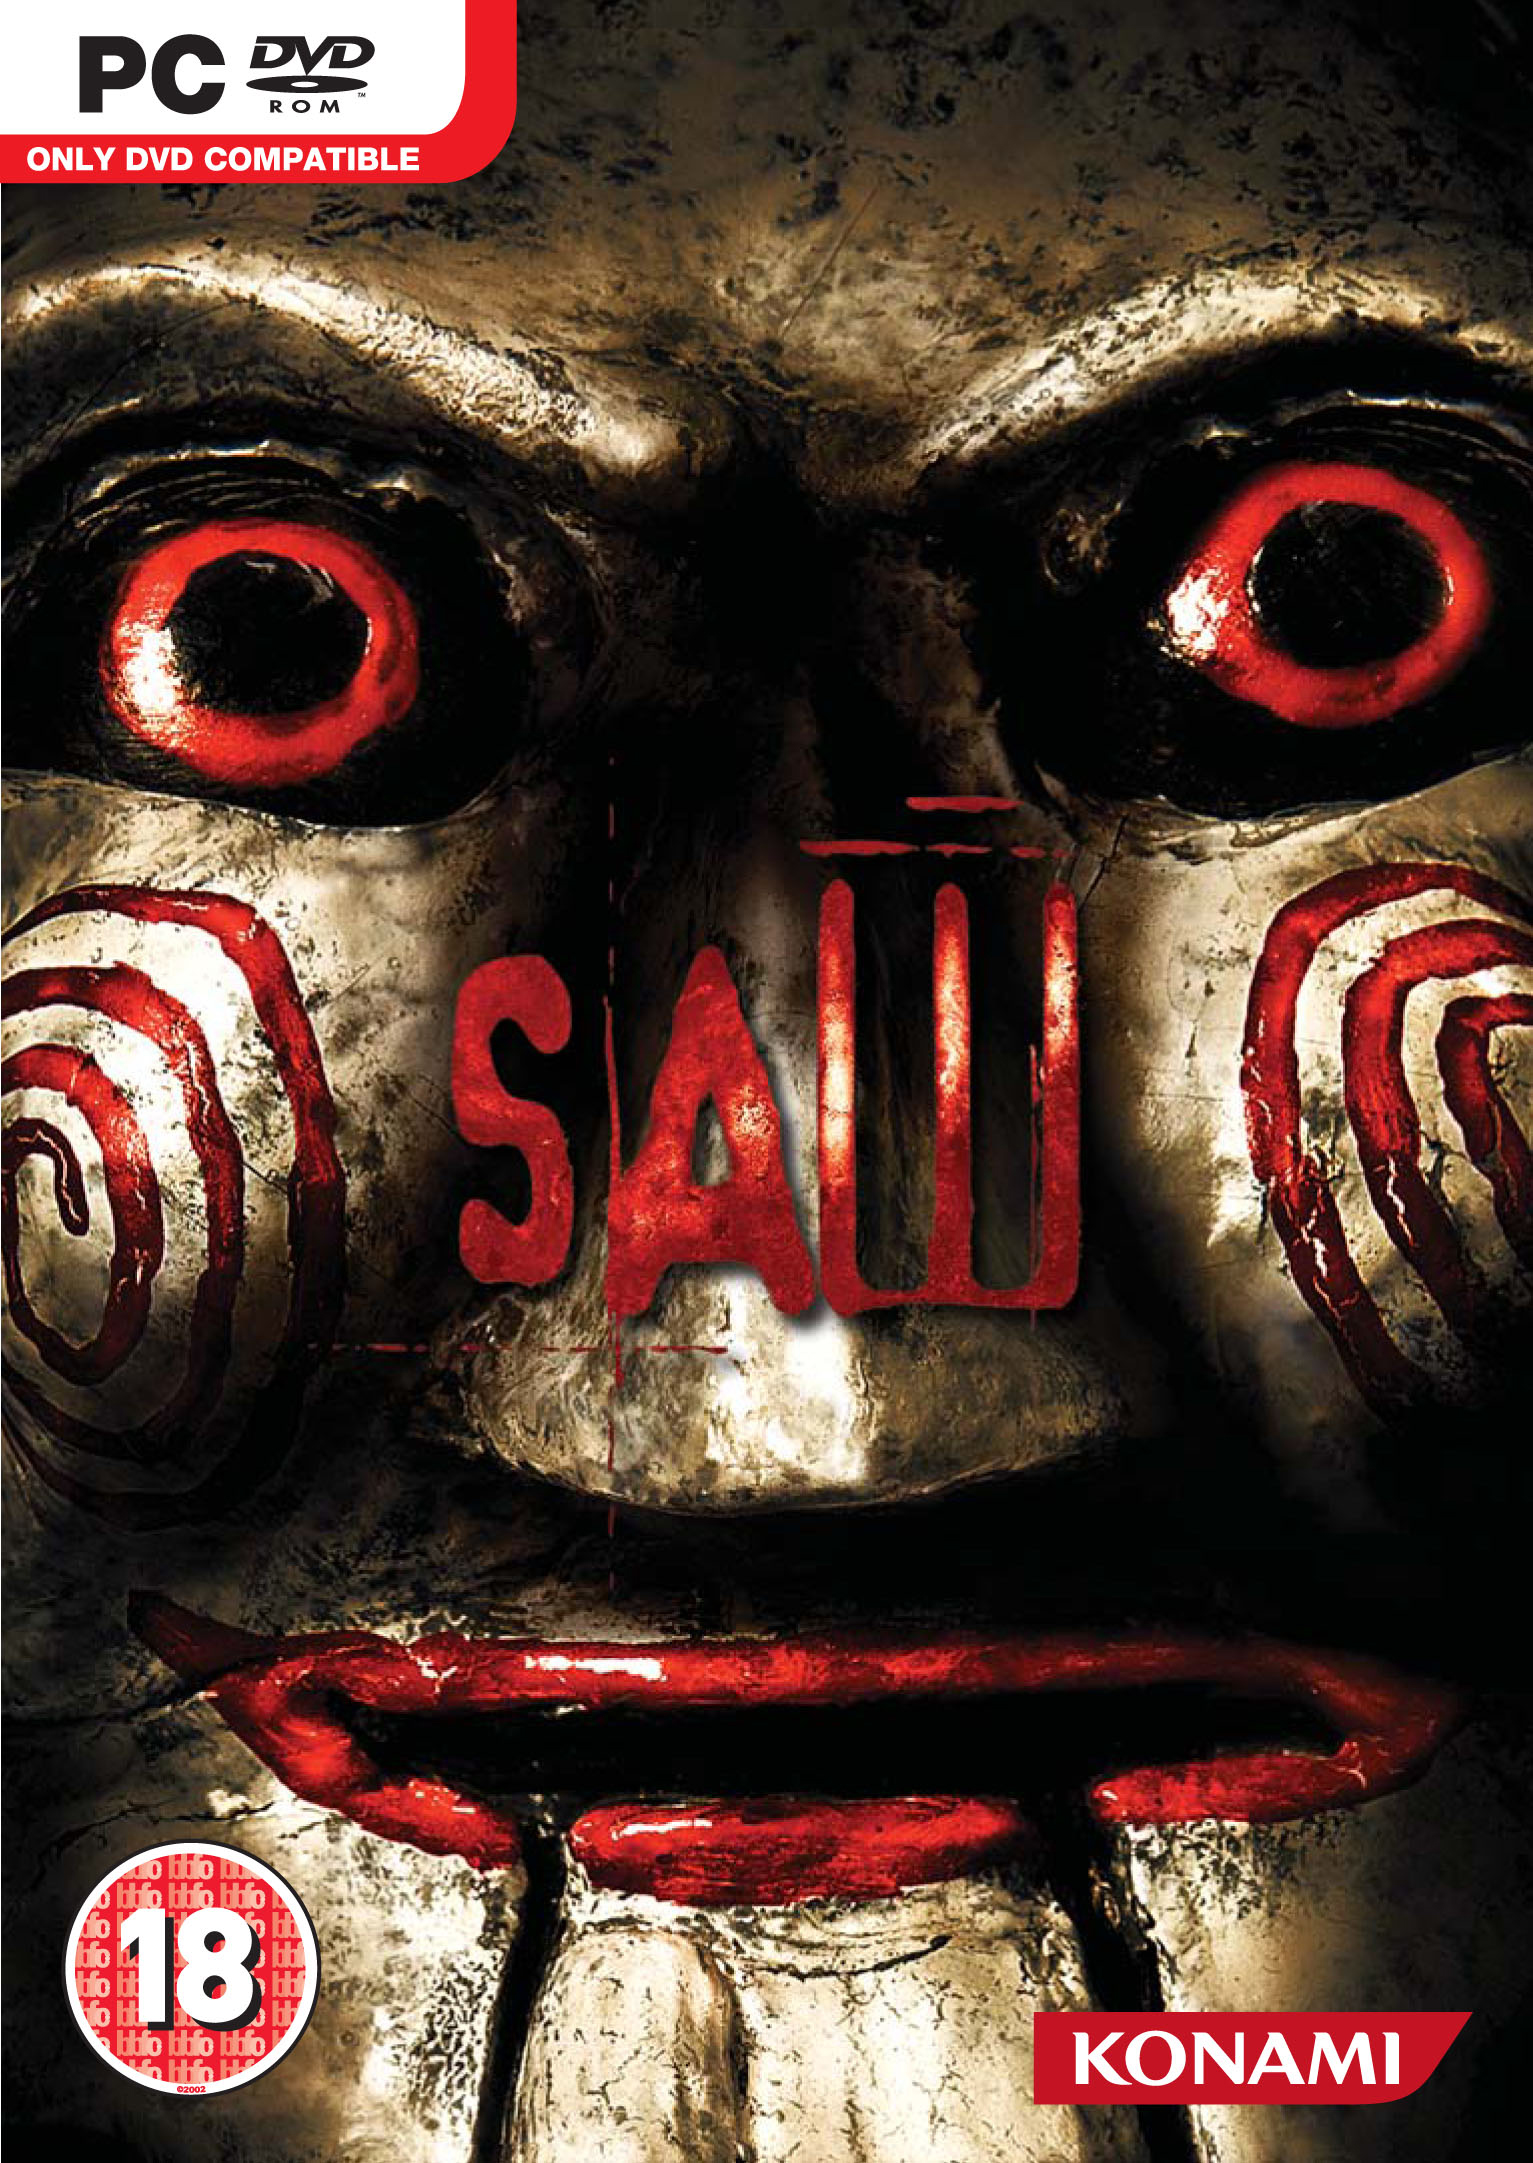 SAW: The Videogame